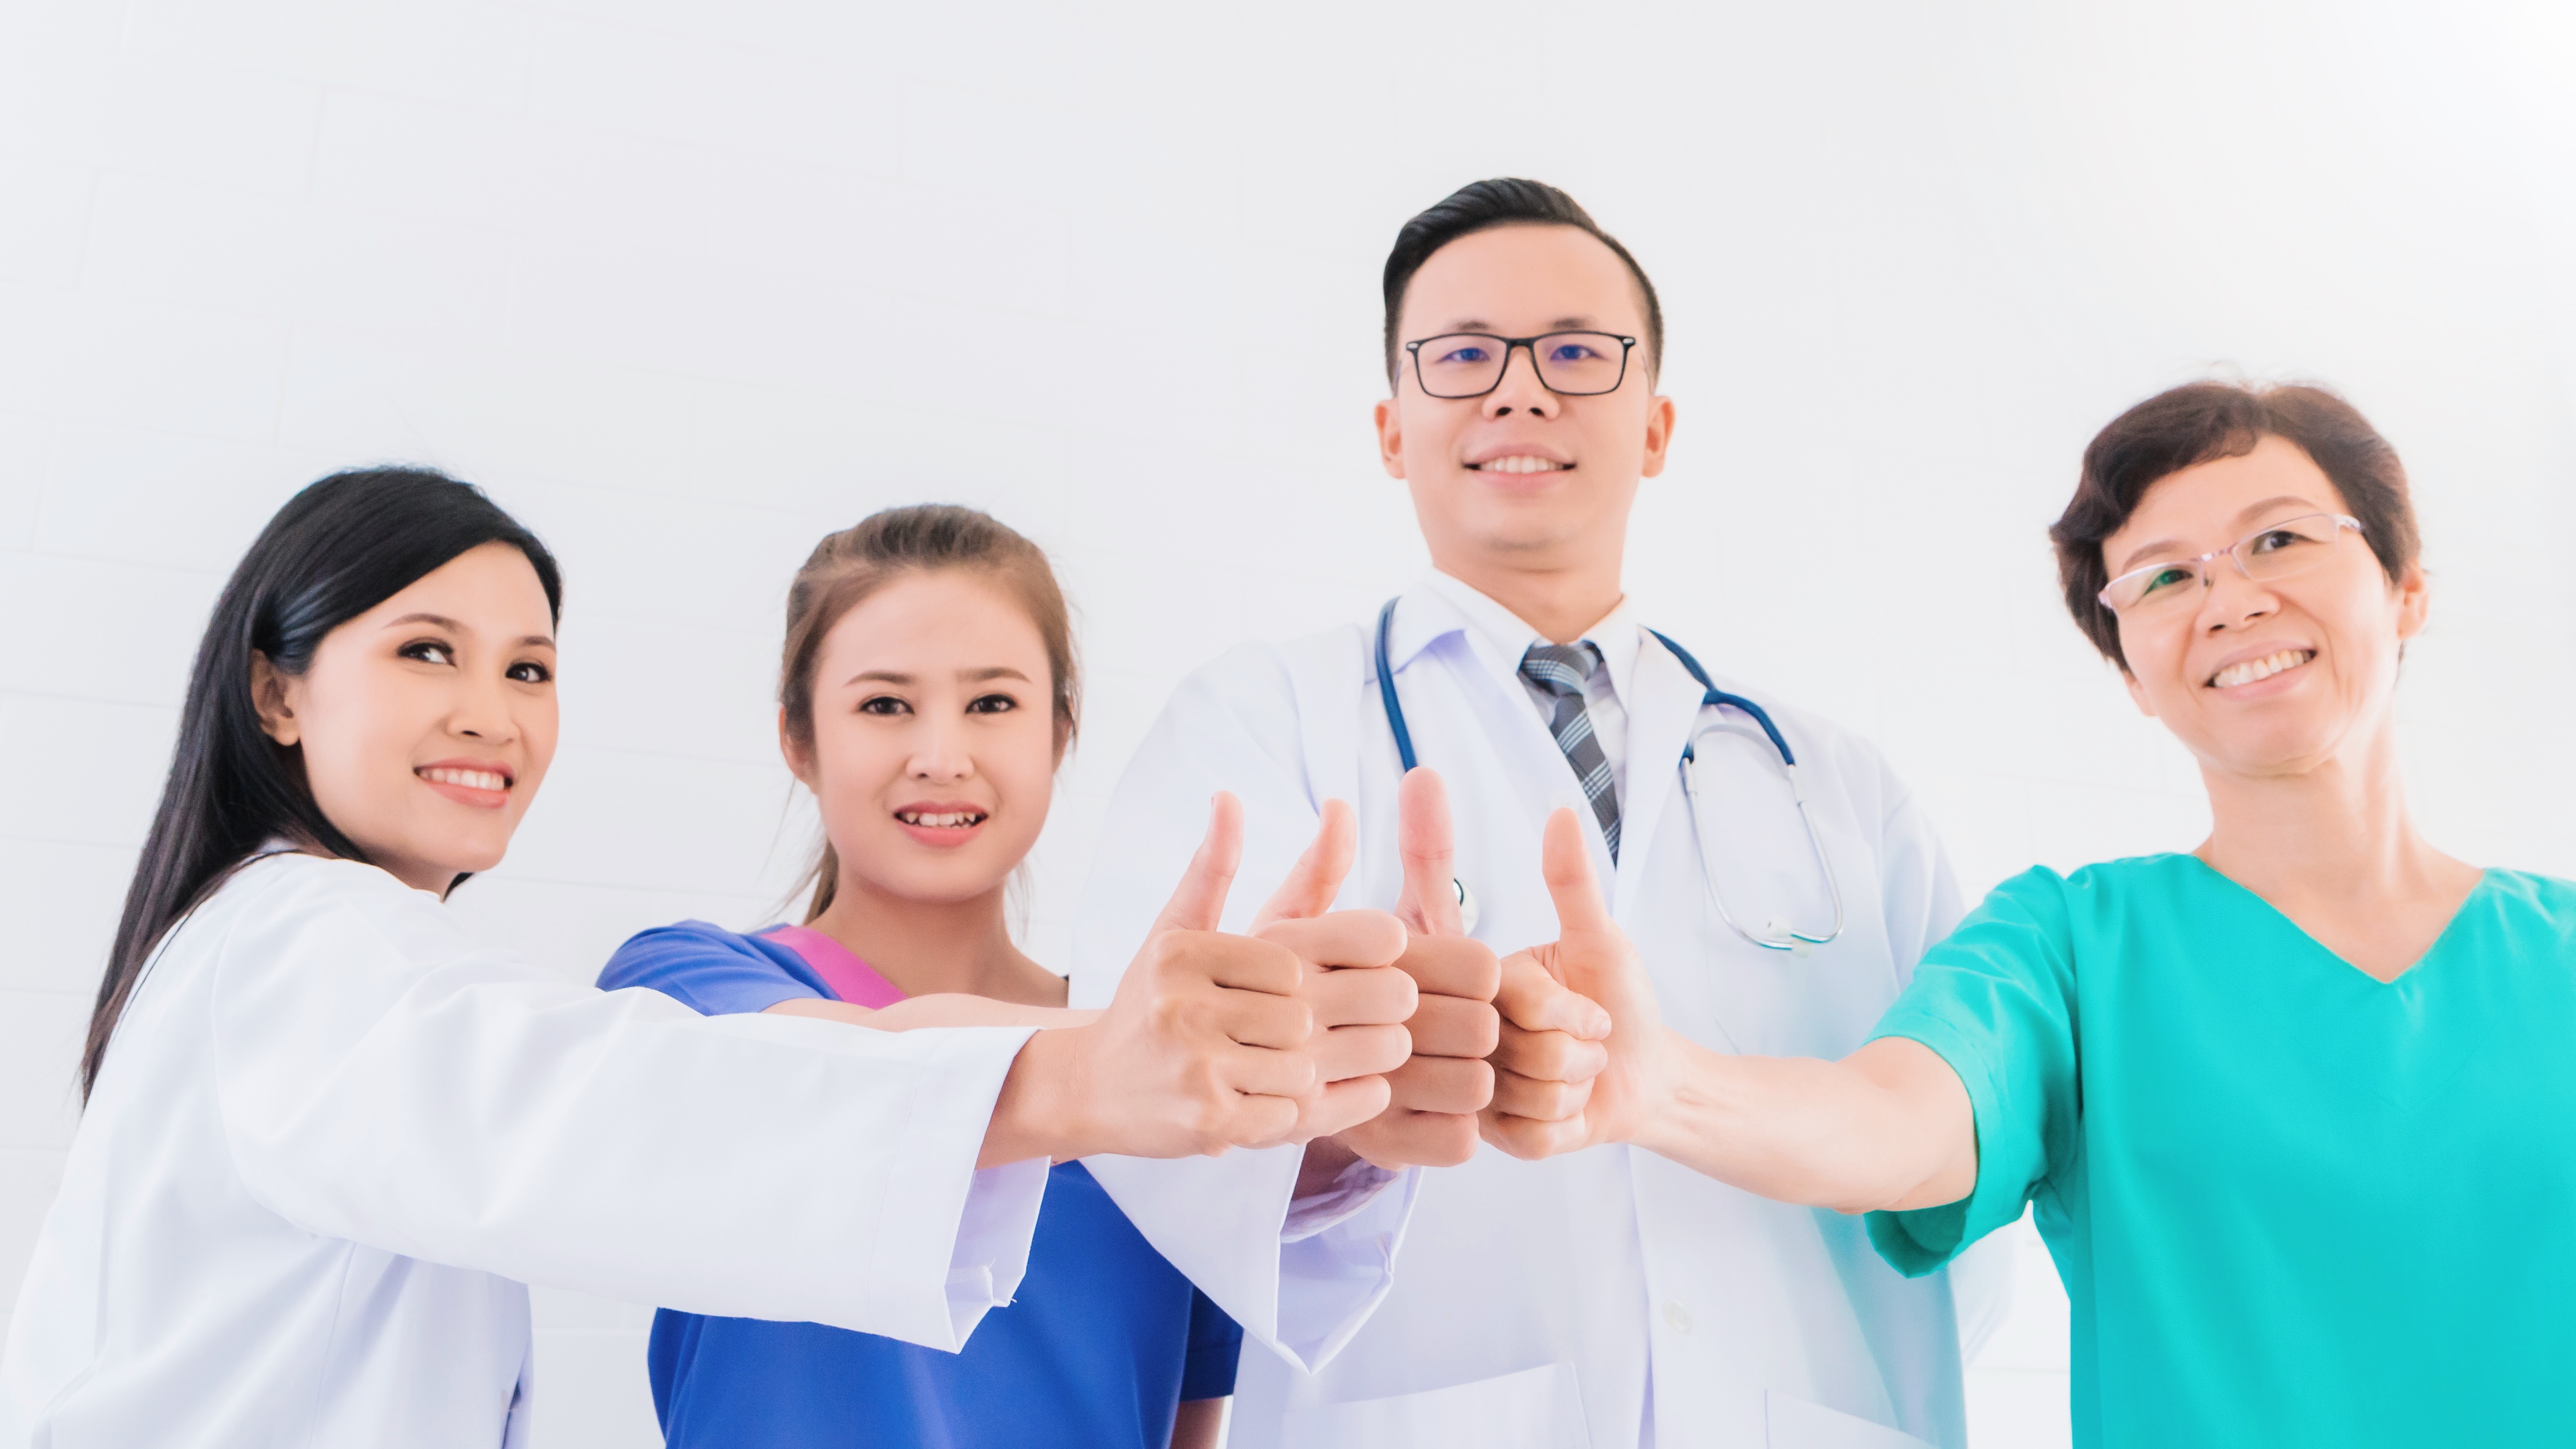 portrait-smiling-asian-medical-male-doctor-standing-showing-hand-thumb-up-with-team-staff-hospital.jpg